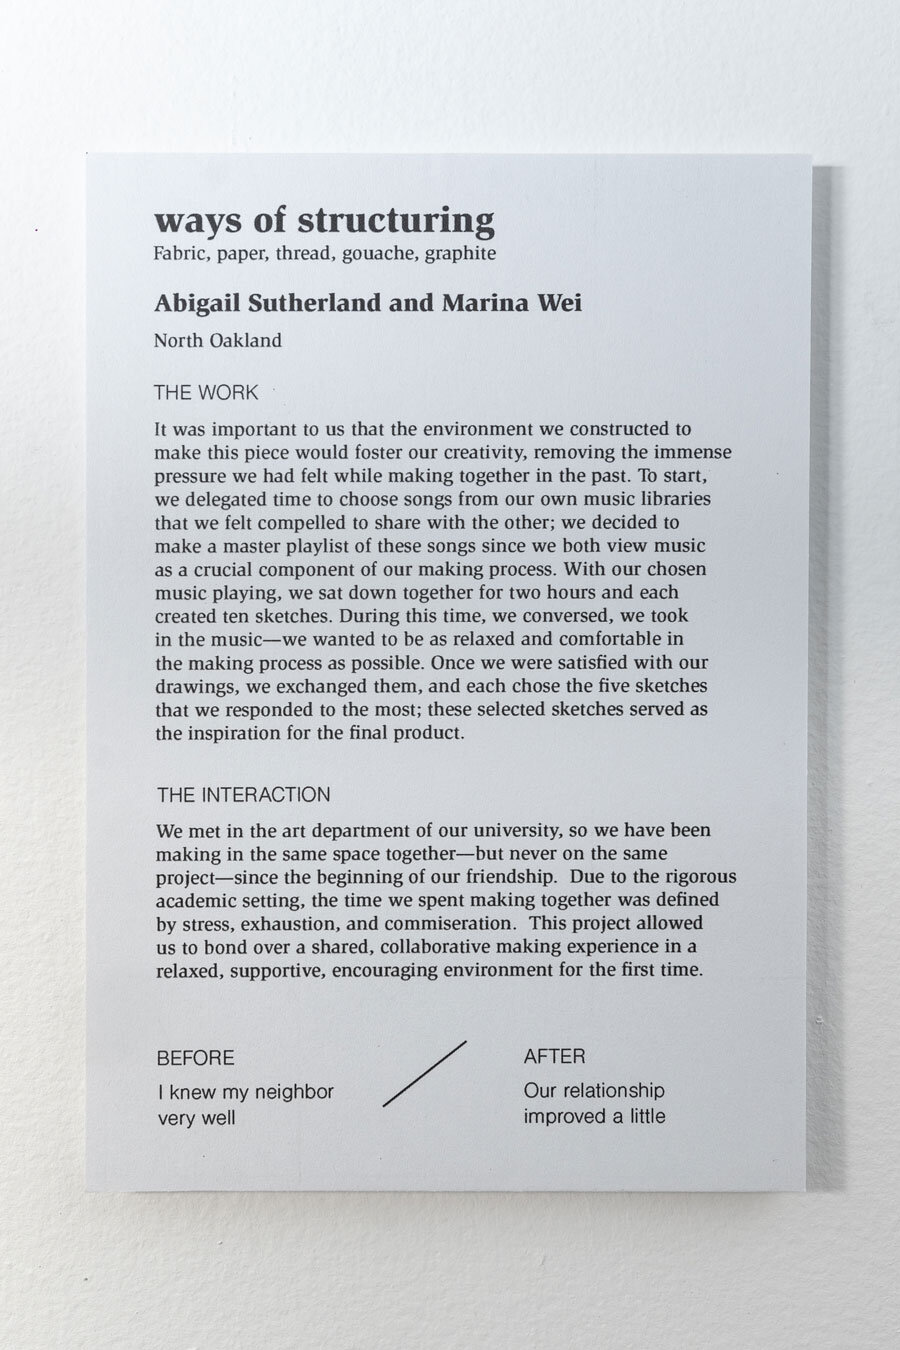 Wall label text for ways of structuring